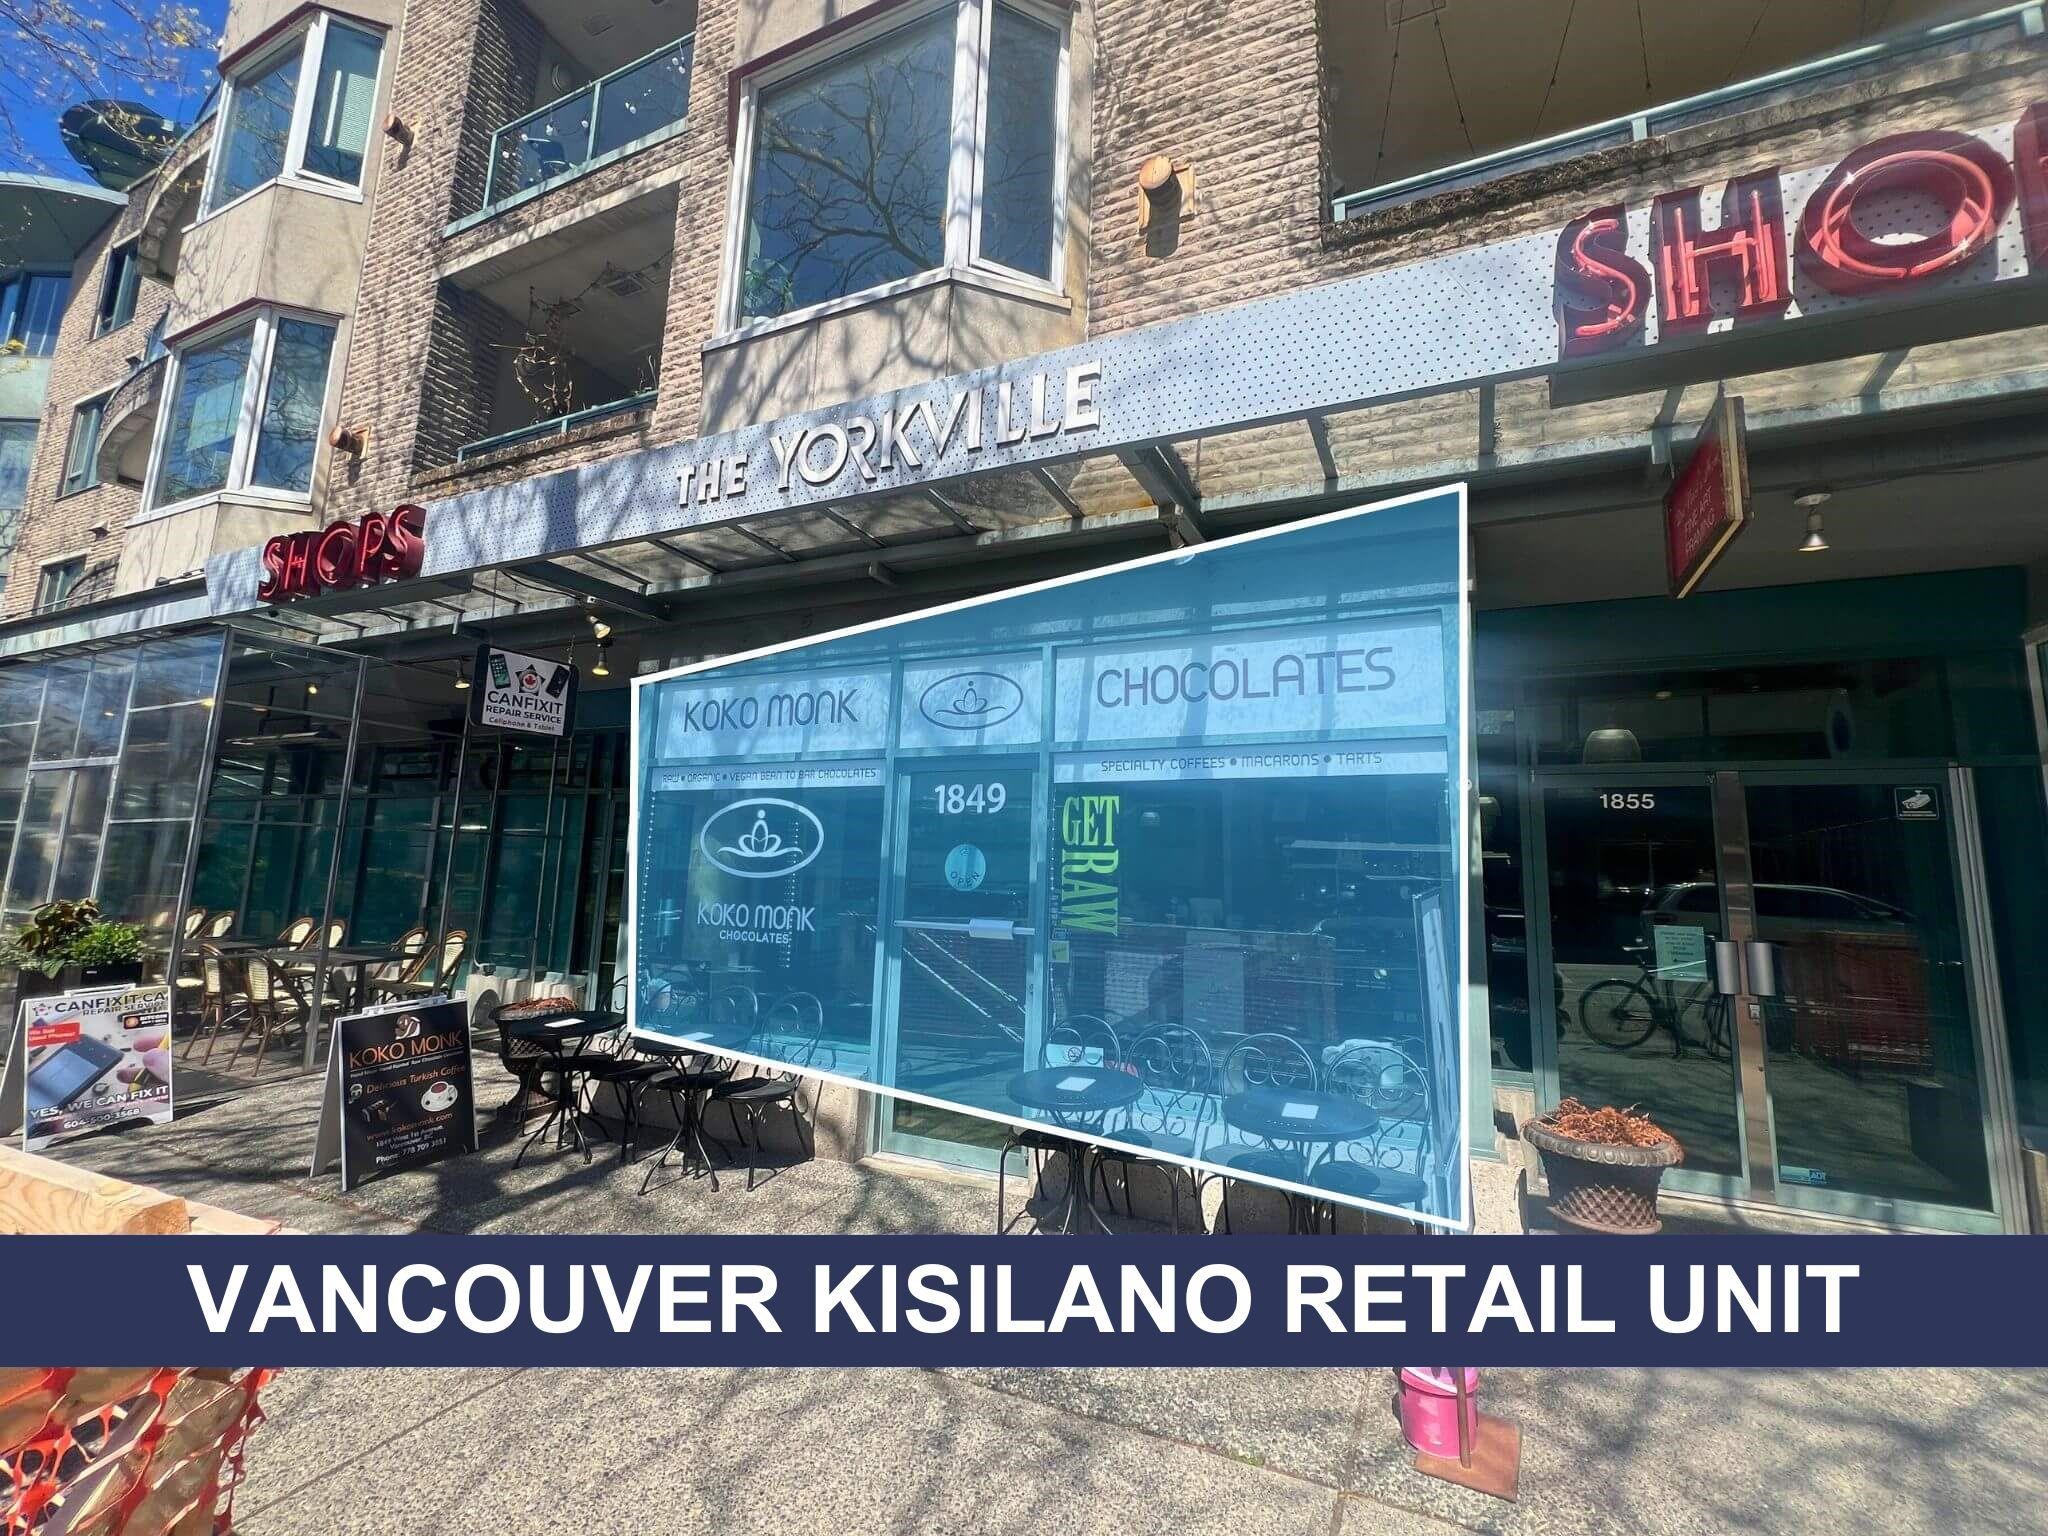 Kitsilano Land Commercial for sale:    (Listed 6800-05-12)